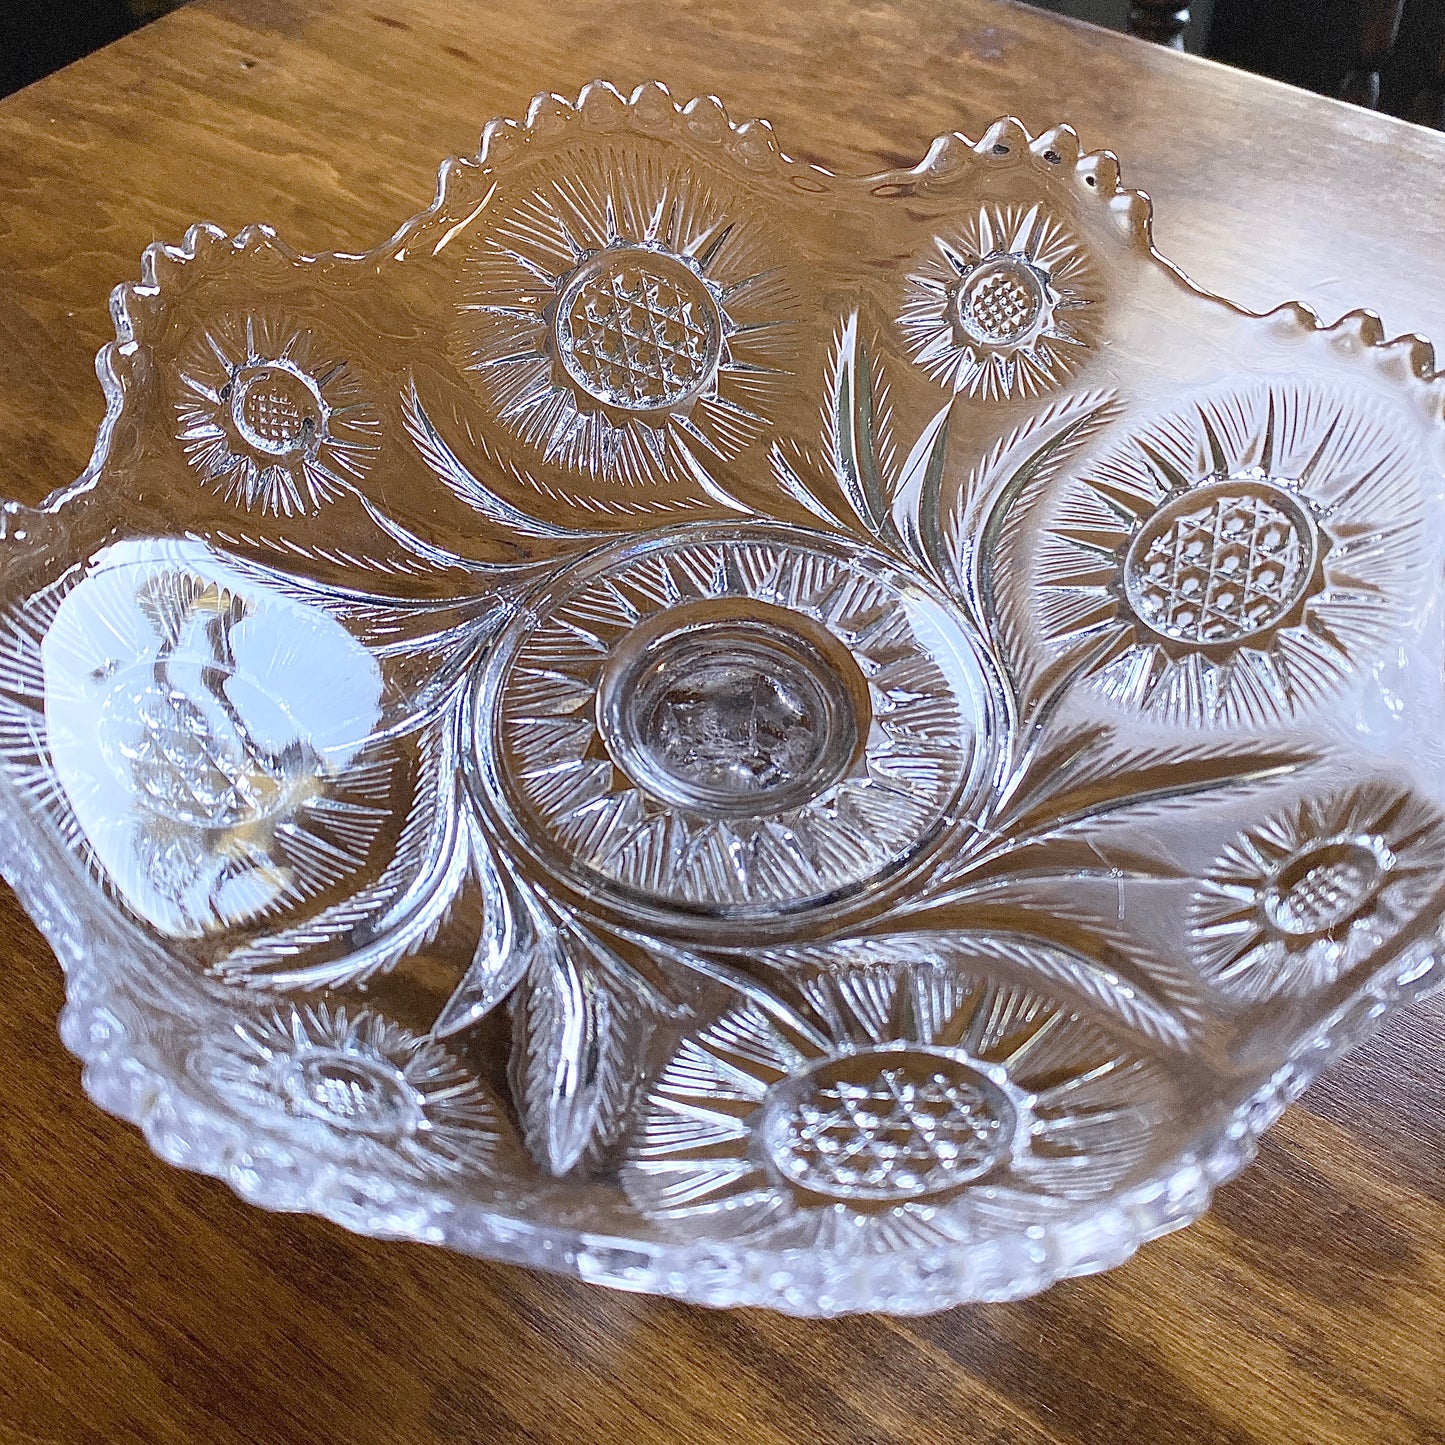 Early Pressed Glass Compote, 'Solar' or 'Feather Swirl' Pattern